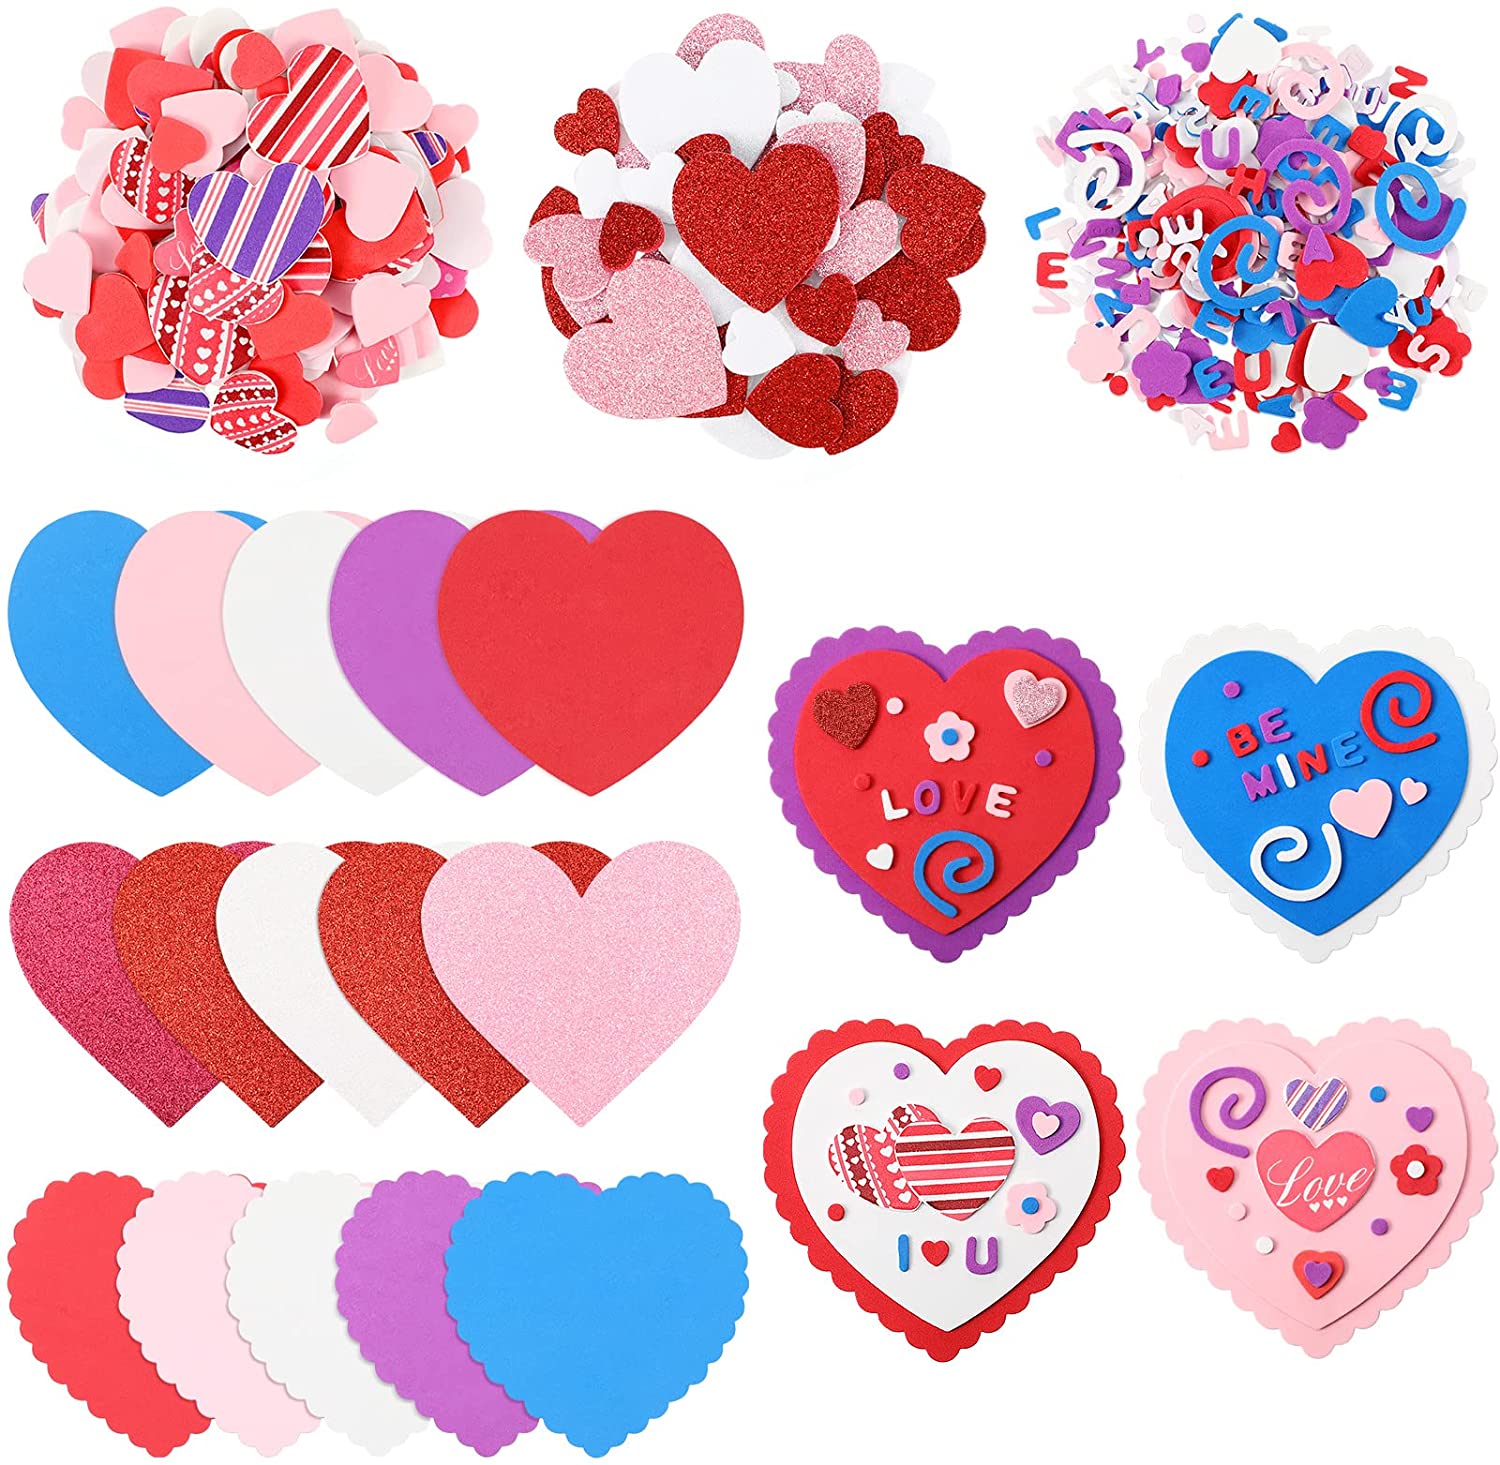 TUPARKA 4 Sheet 100 Stickers Hearts-Shape Valentines Day Stickers for Valentines Decoration Birthday Party Wedding Party Supplies 